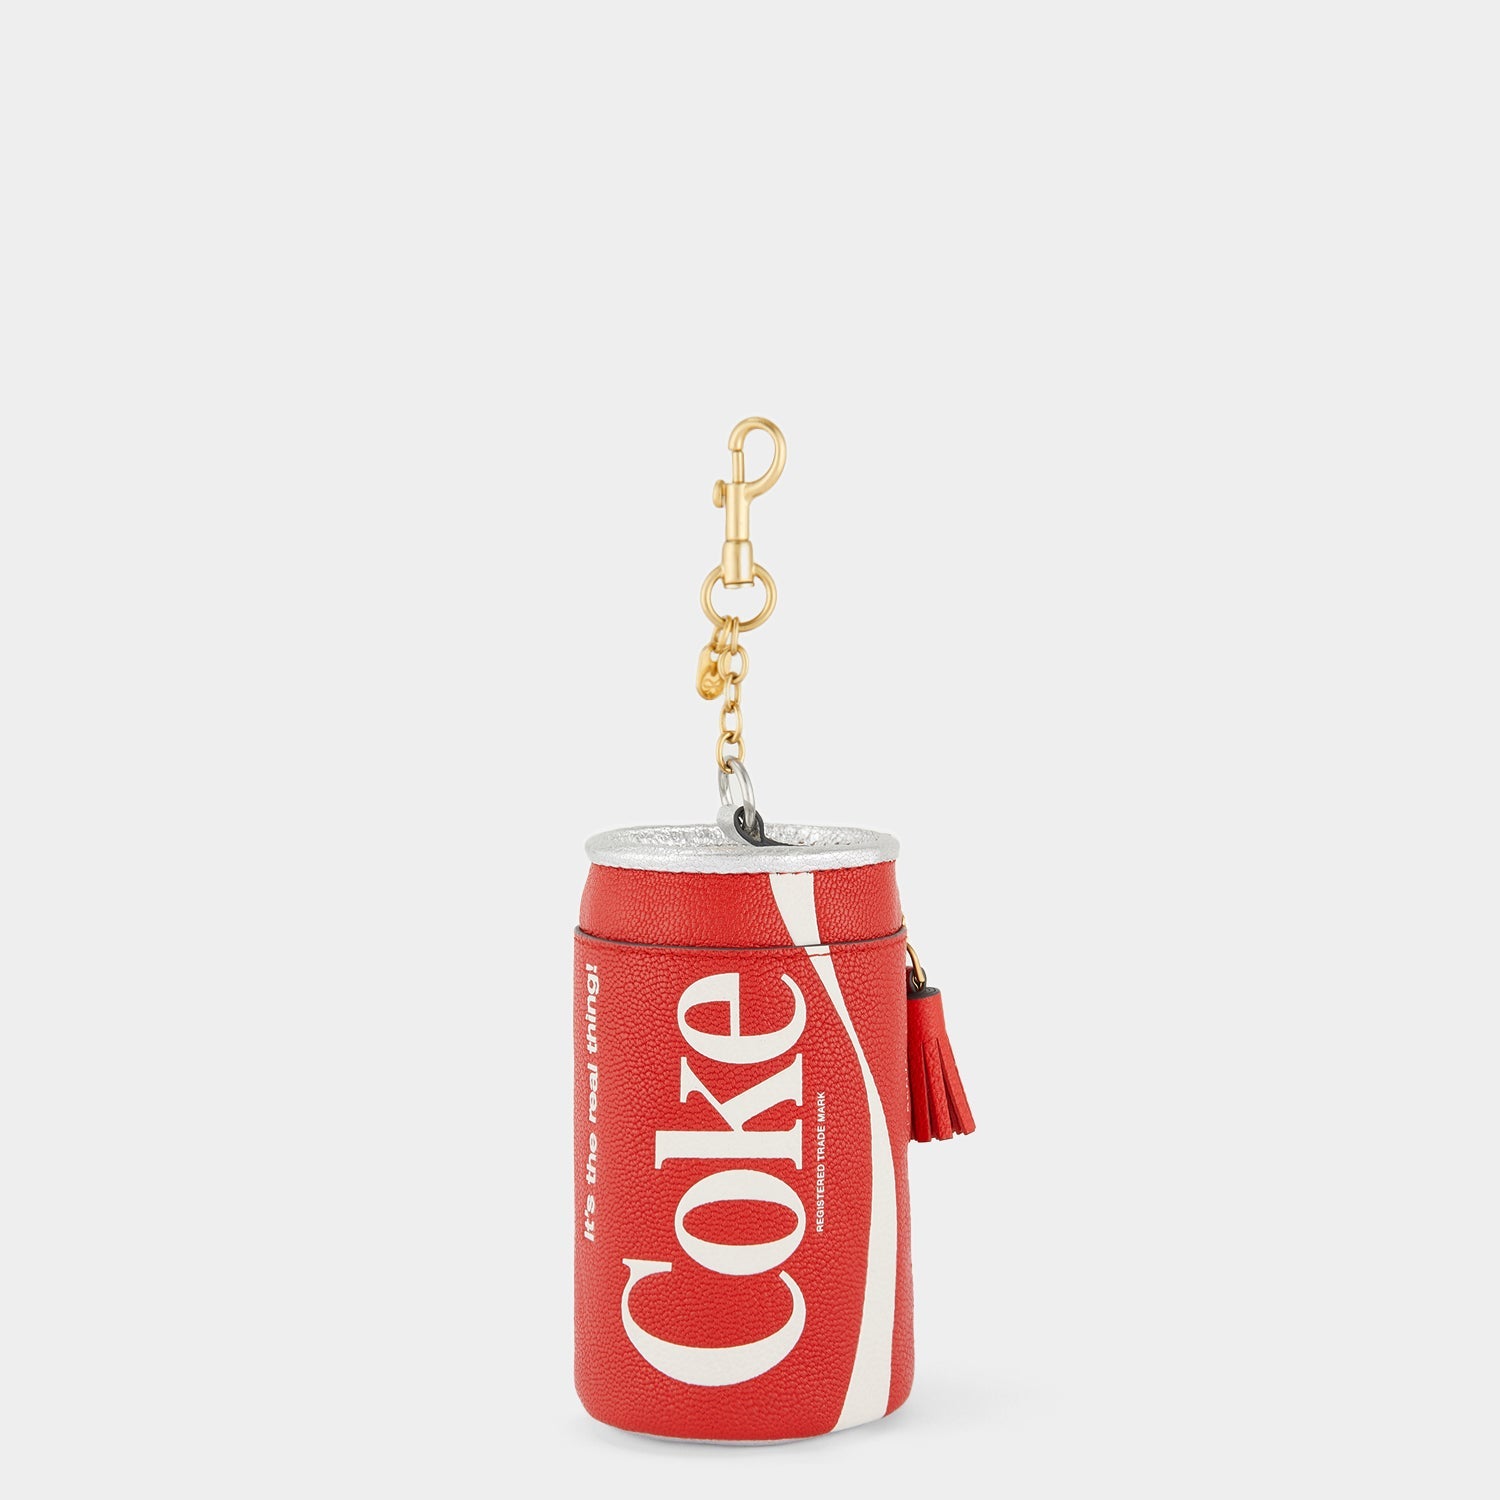 Anya Brands Coca Cola Coin Purse -

                  
                    Capra Leather in Bright Red -
                  

                  Anya Hindmarch US
